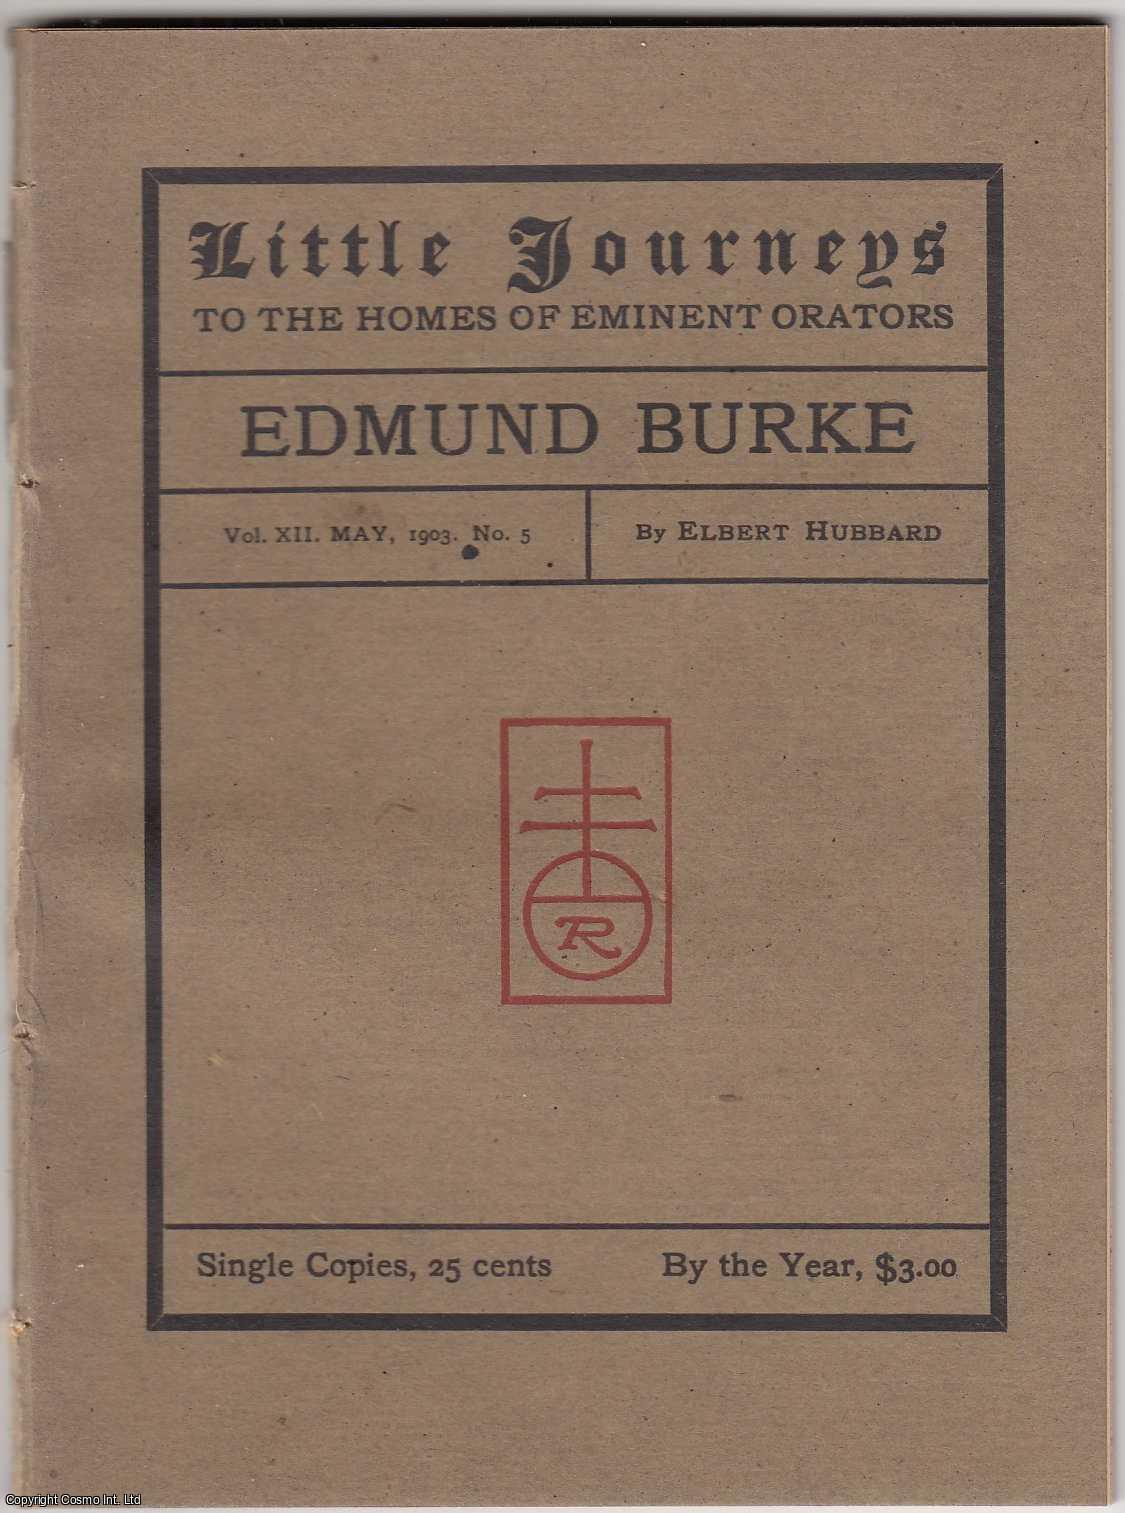 Elbert Hubbard - Edmund Burke. Little Journeys to Homes of Eminent Orators. Published by The Roycrofters 1903.